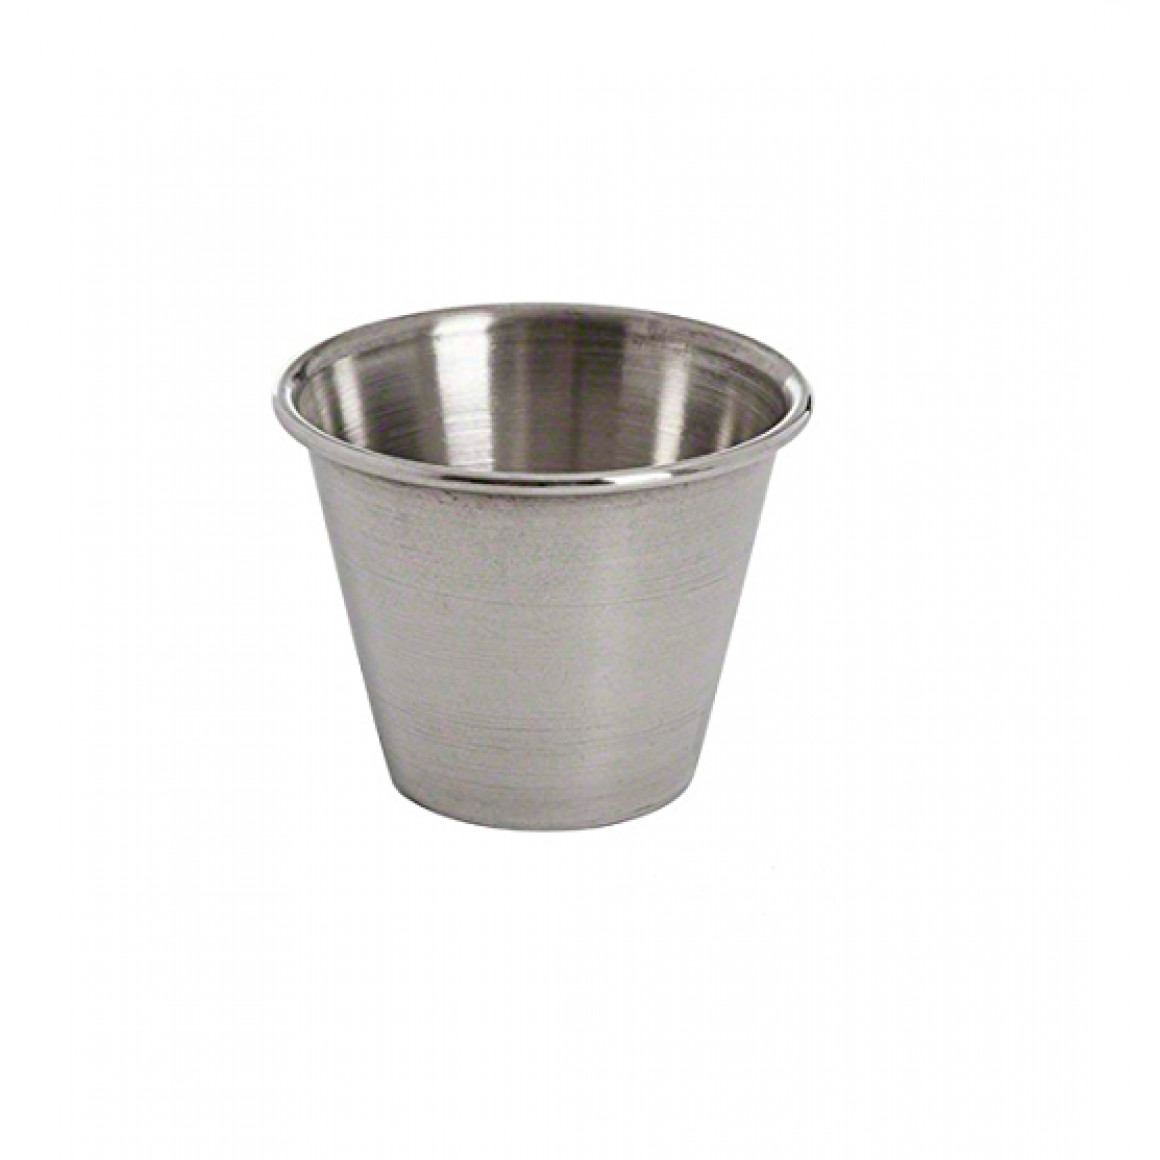 SAUCE CUP, STAINLESS STEEL, ROUND, 2.5 OZ.